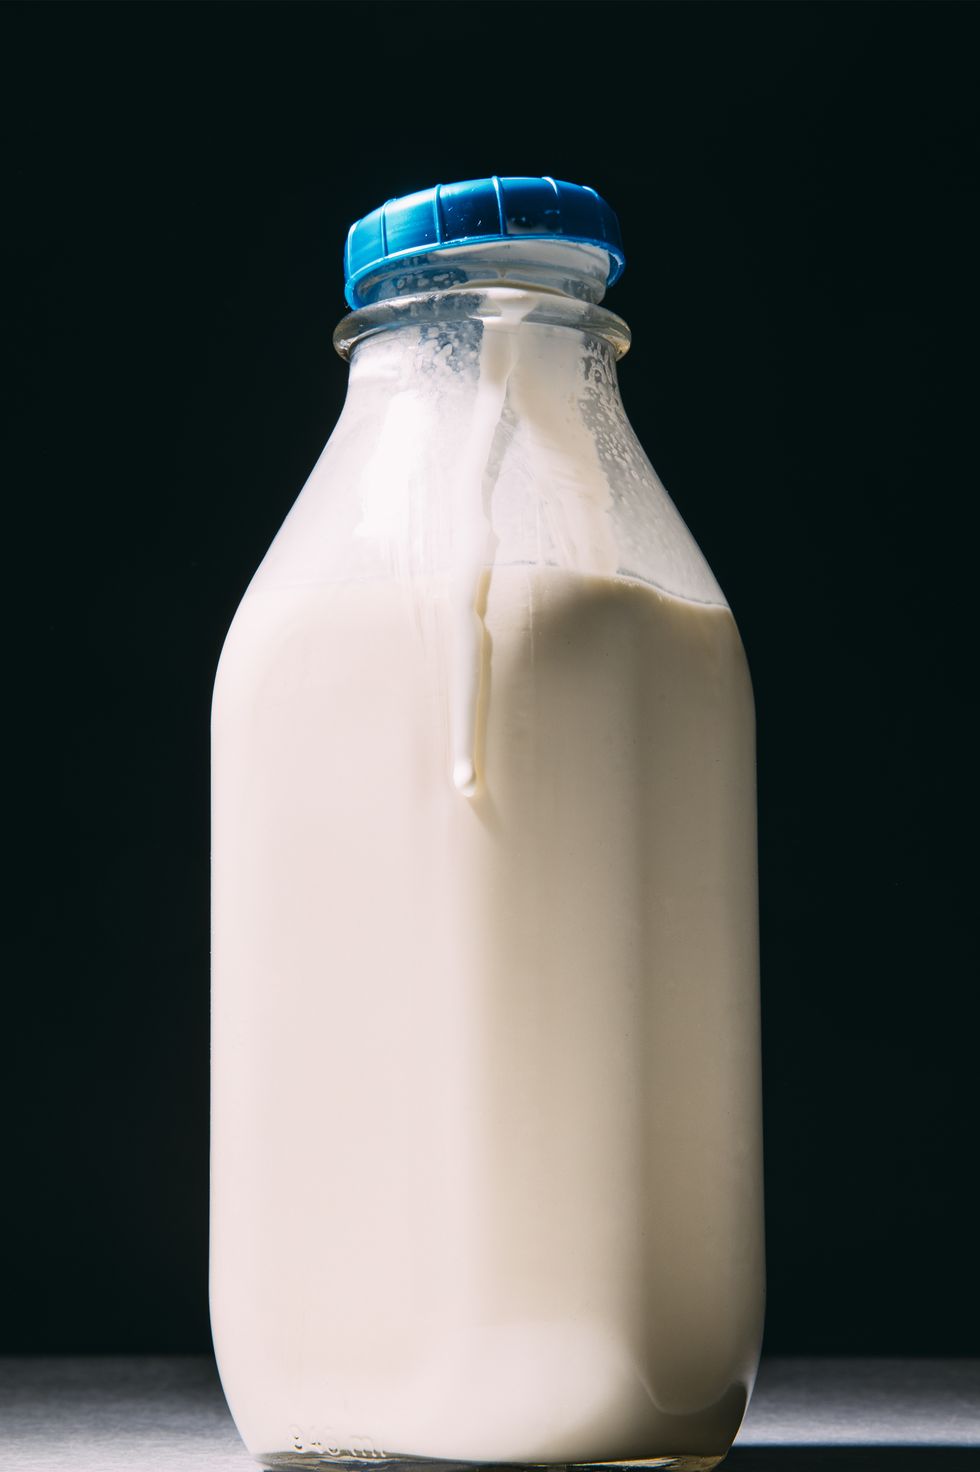 Raw Milk - You Can Find in a Retail Store